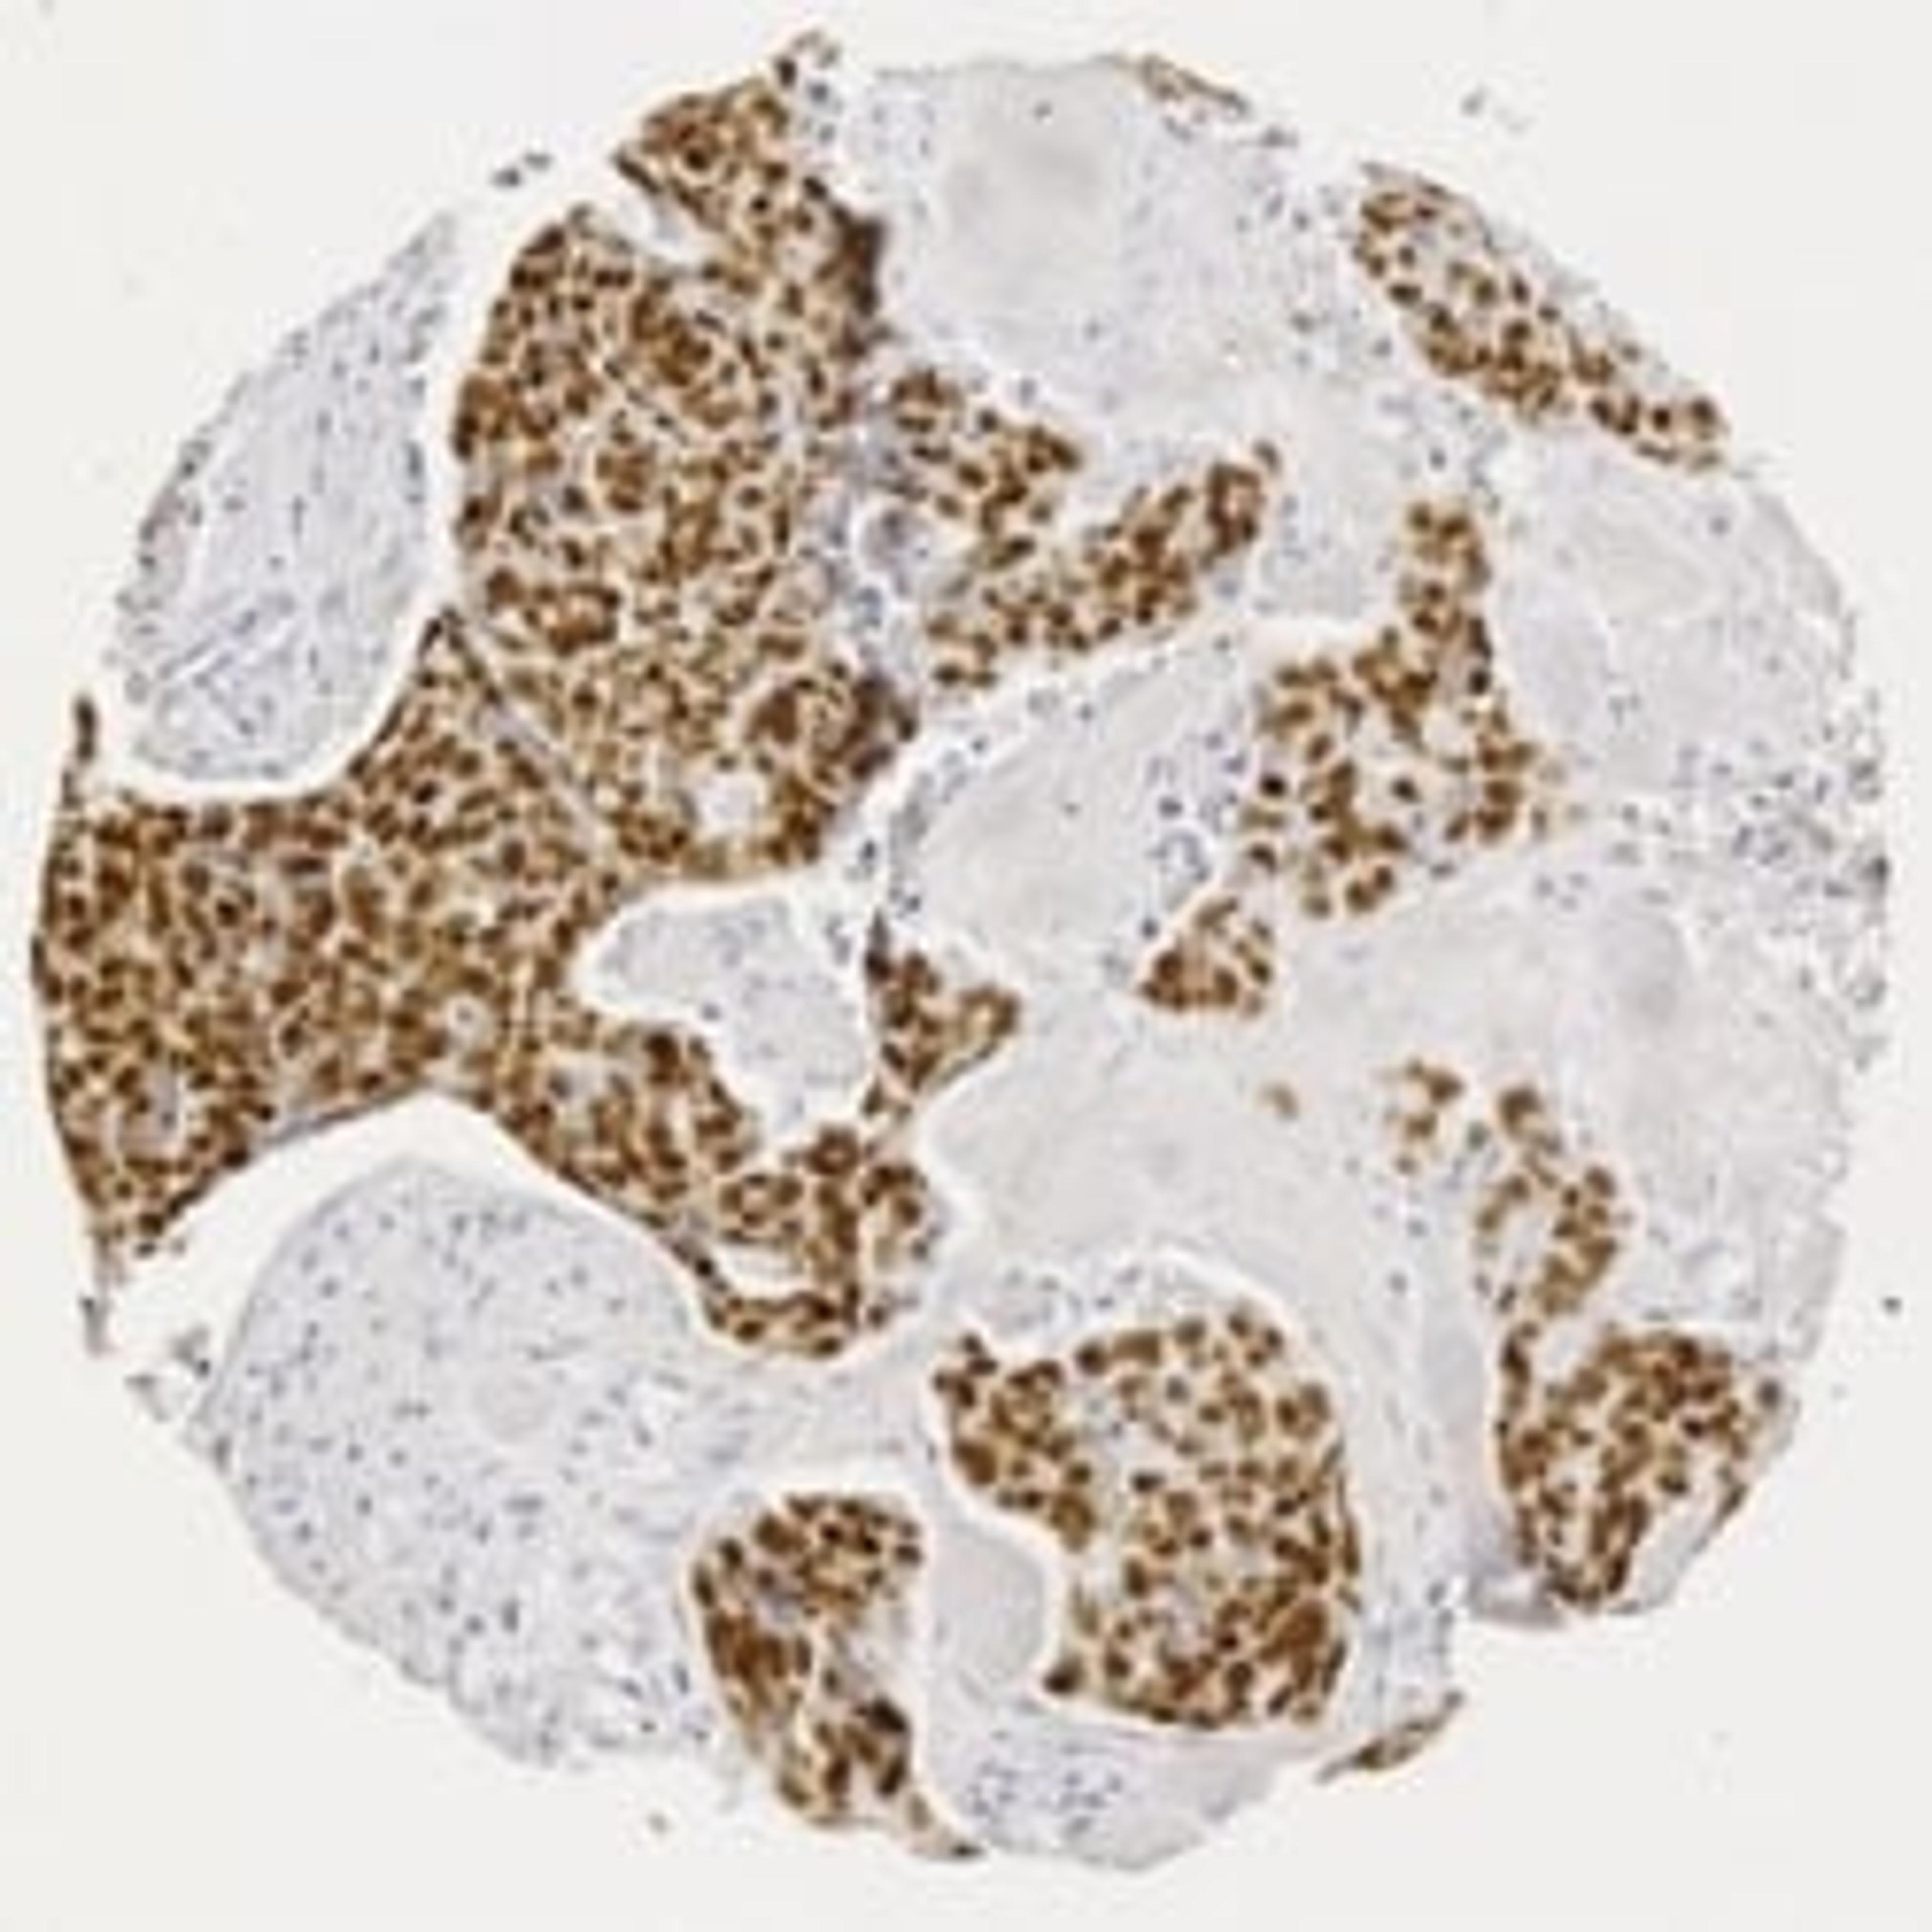 p53 staining in human squamous cell carcinoma.